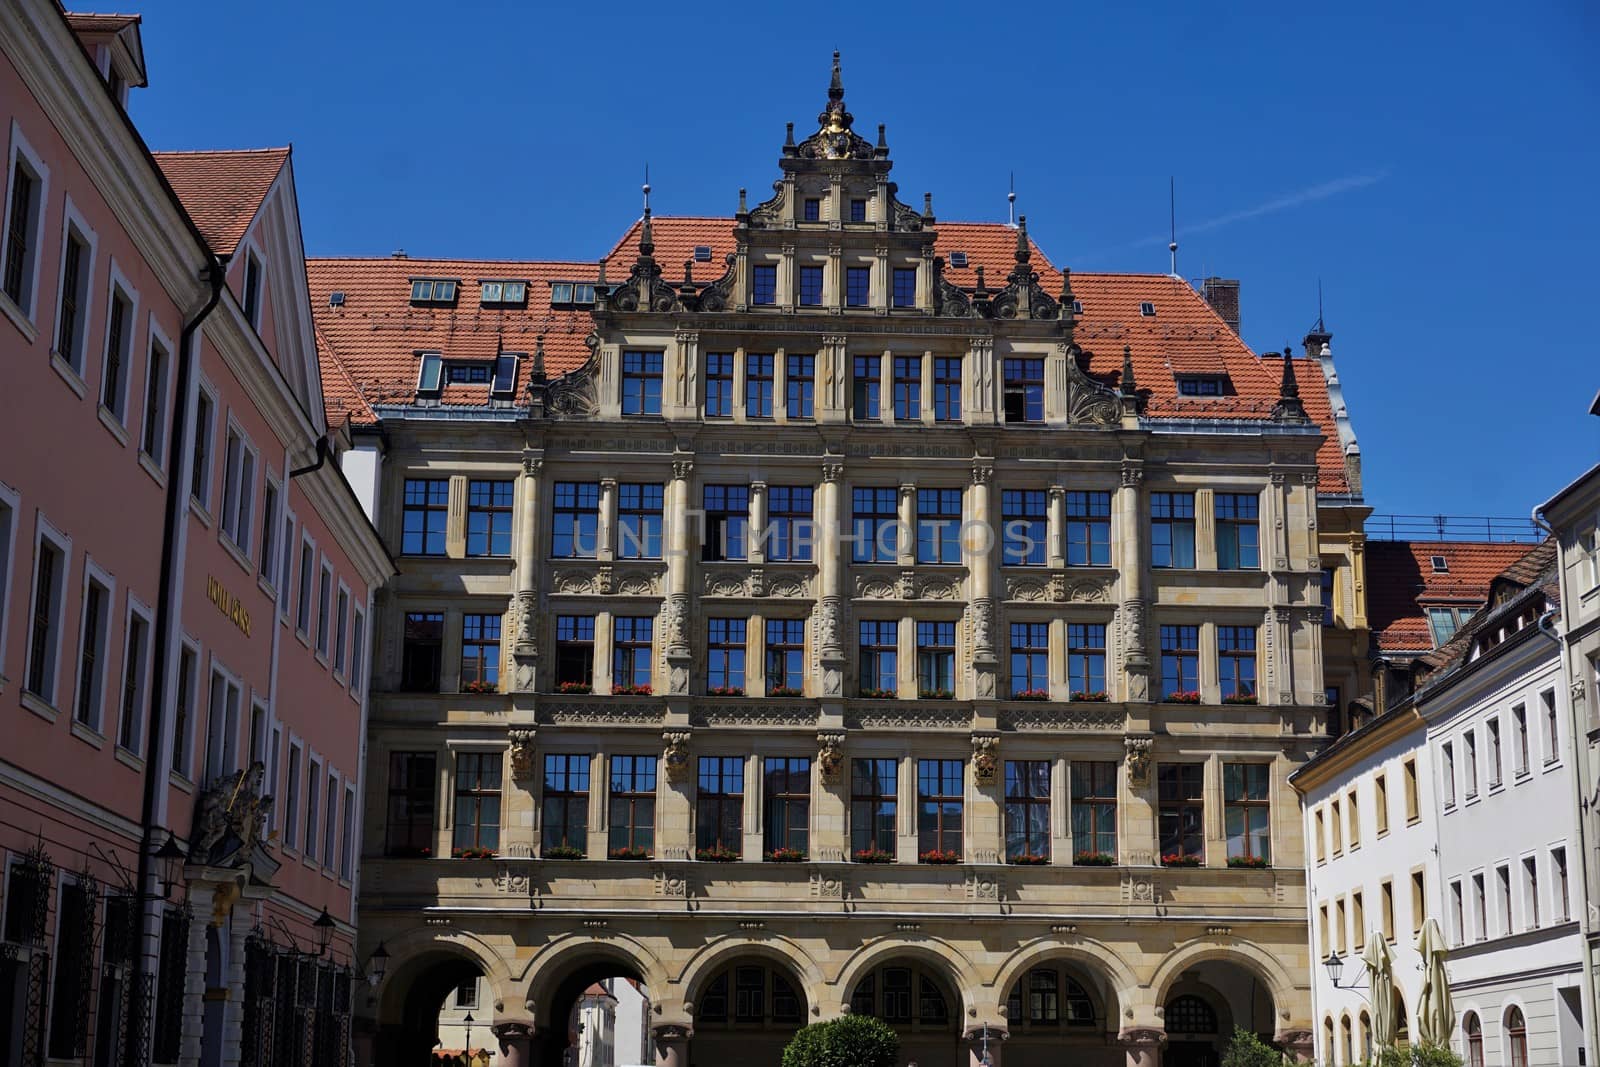 The beautiful facade of the New Town Hall of Goerlitz, Germany